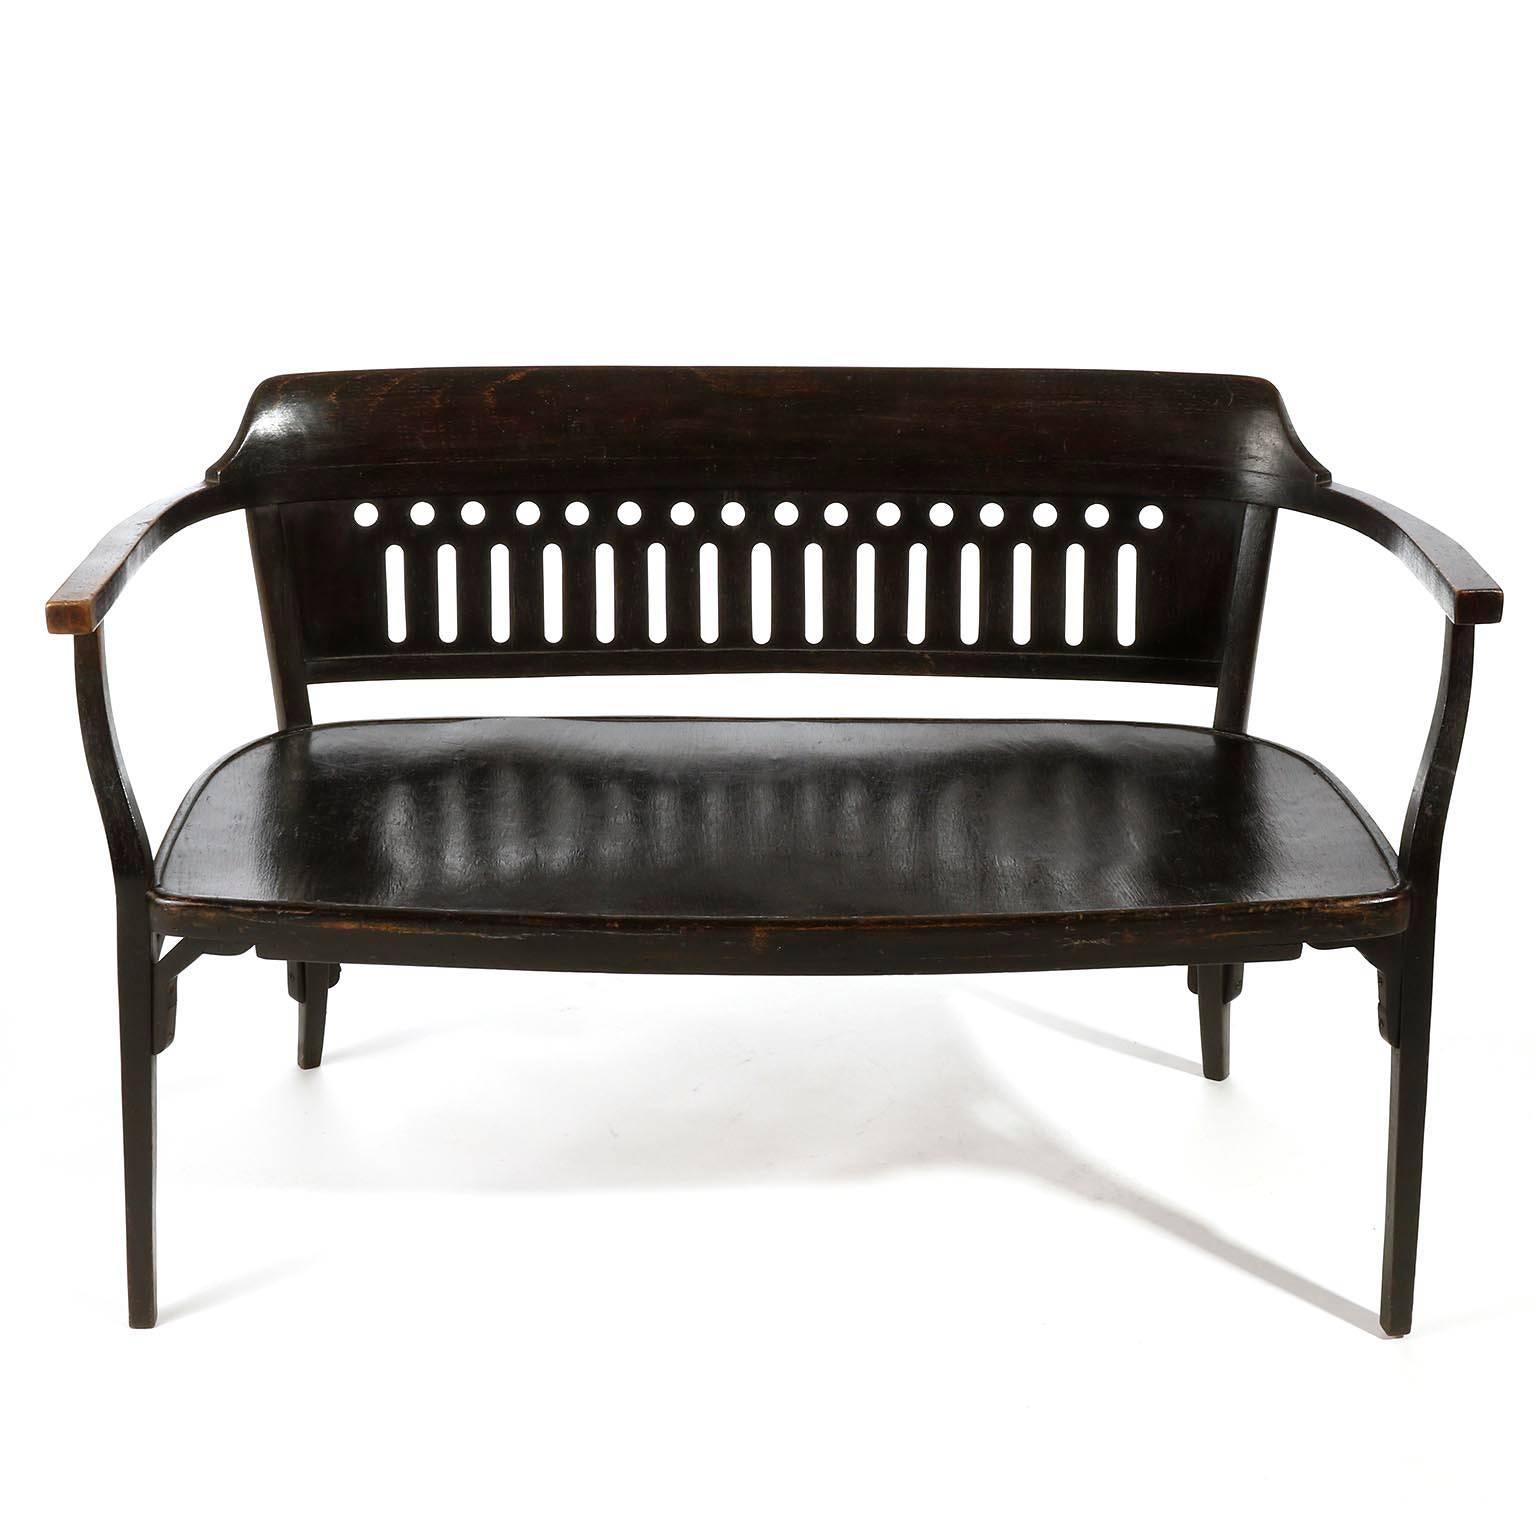 Austrian Otto Wagner Settee Bench Bentwood, Thonet, Austria, Vienna Secession, circa 1905 For Sale